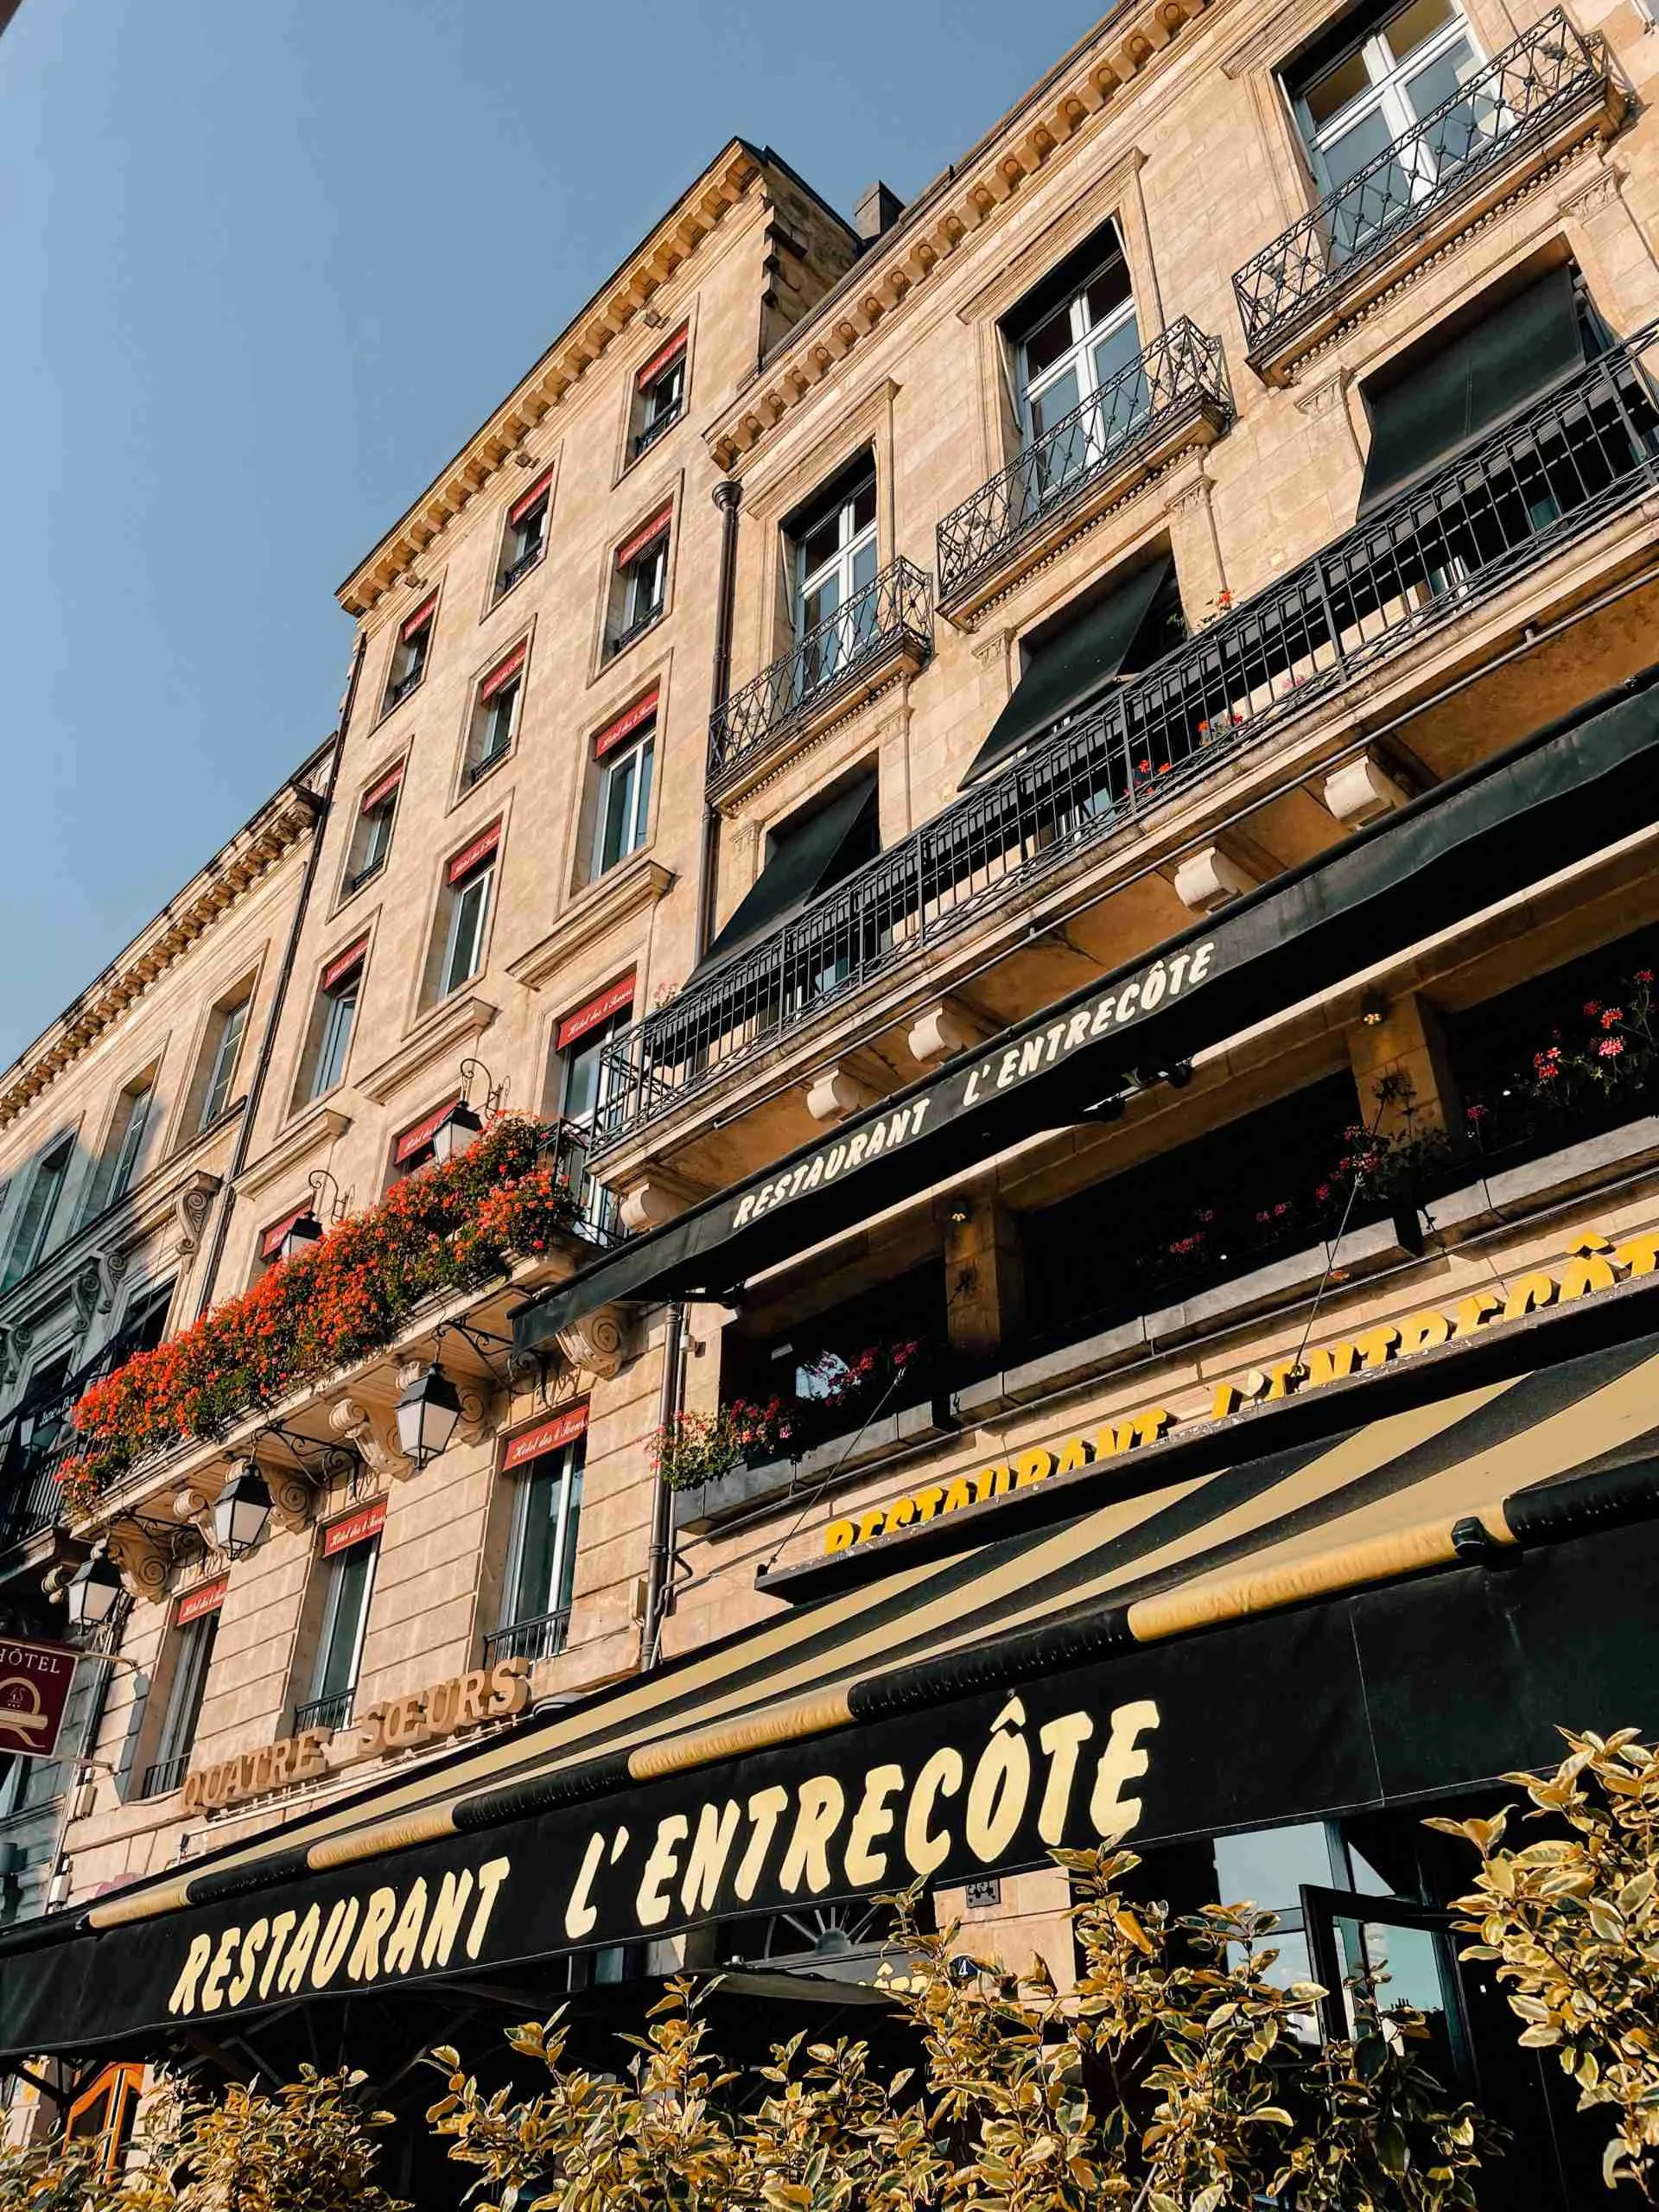 The store front of the restaurant l'entrecote in Bordeaux 